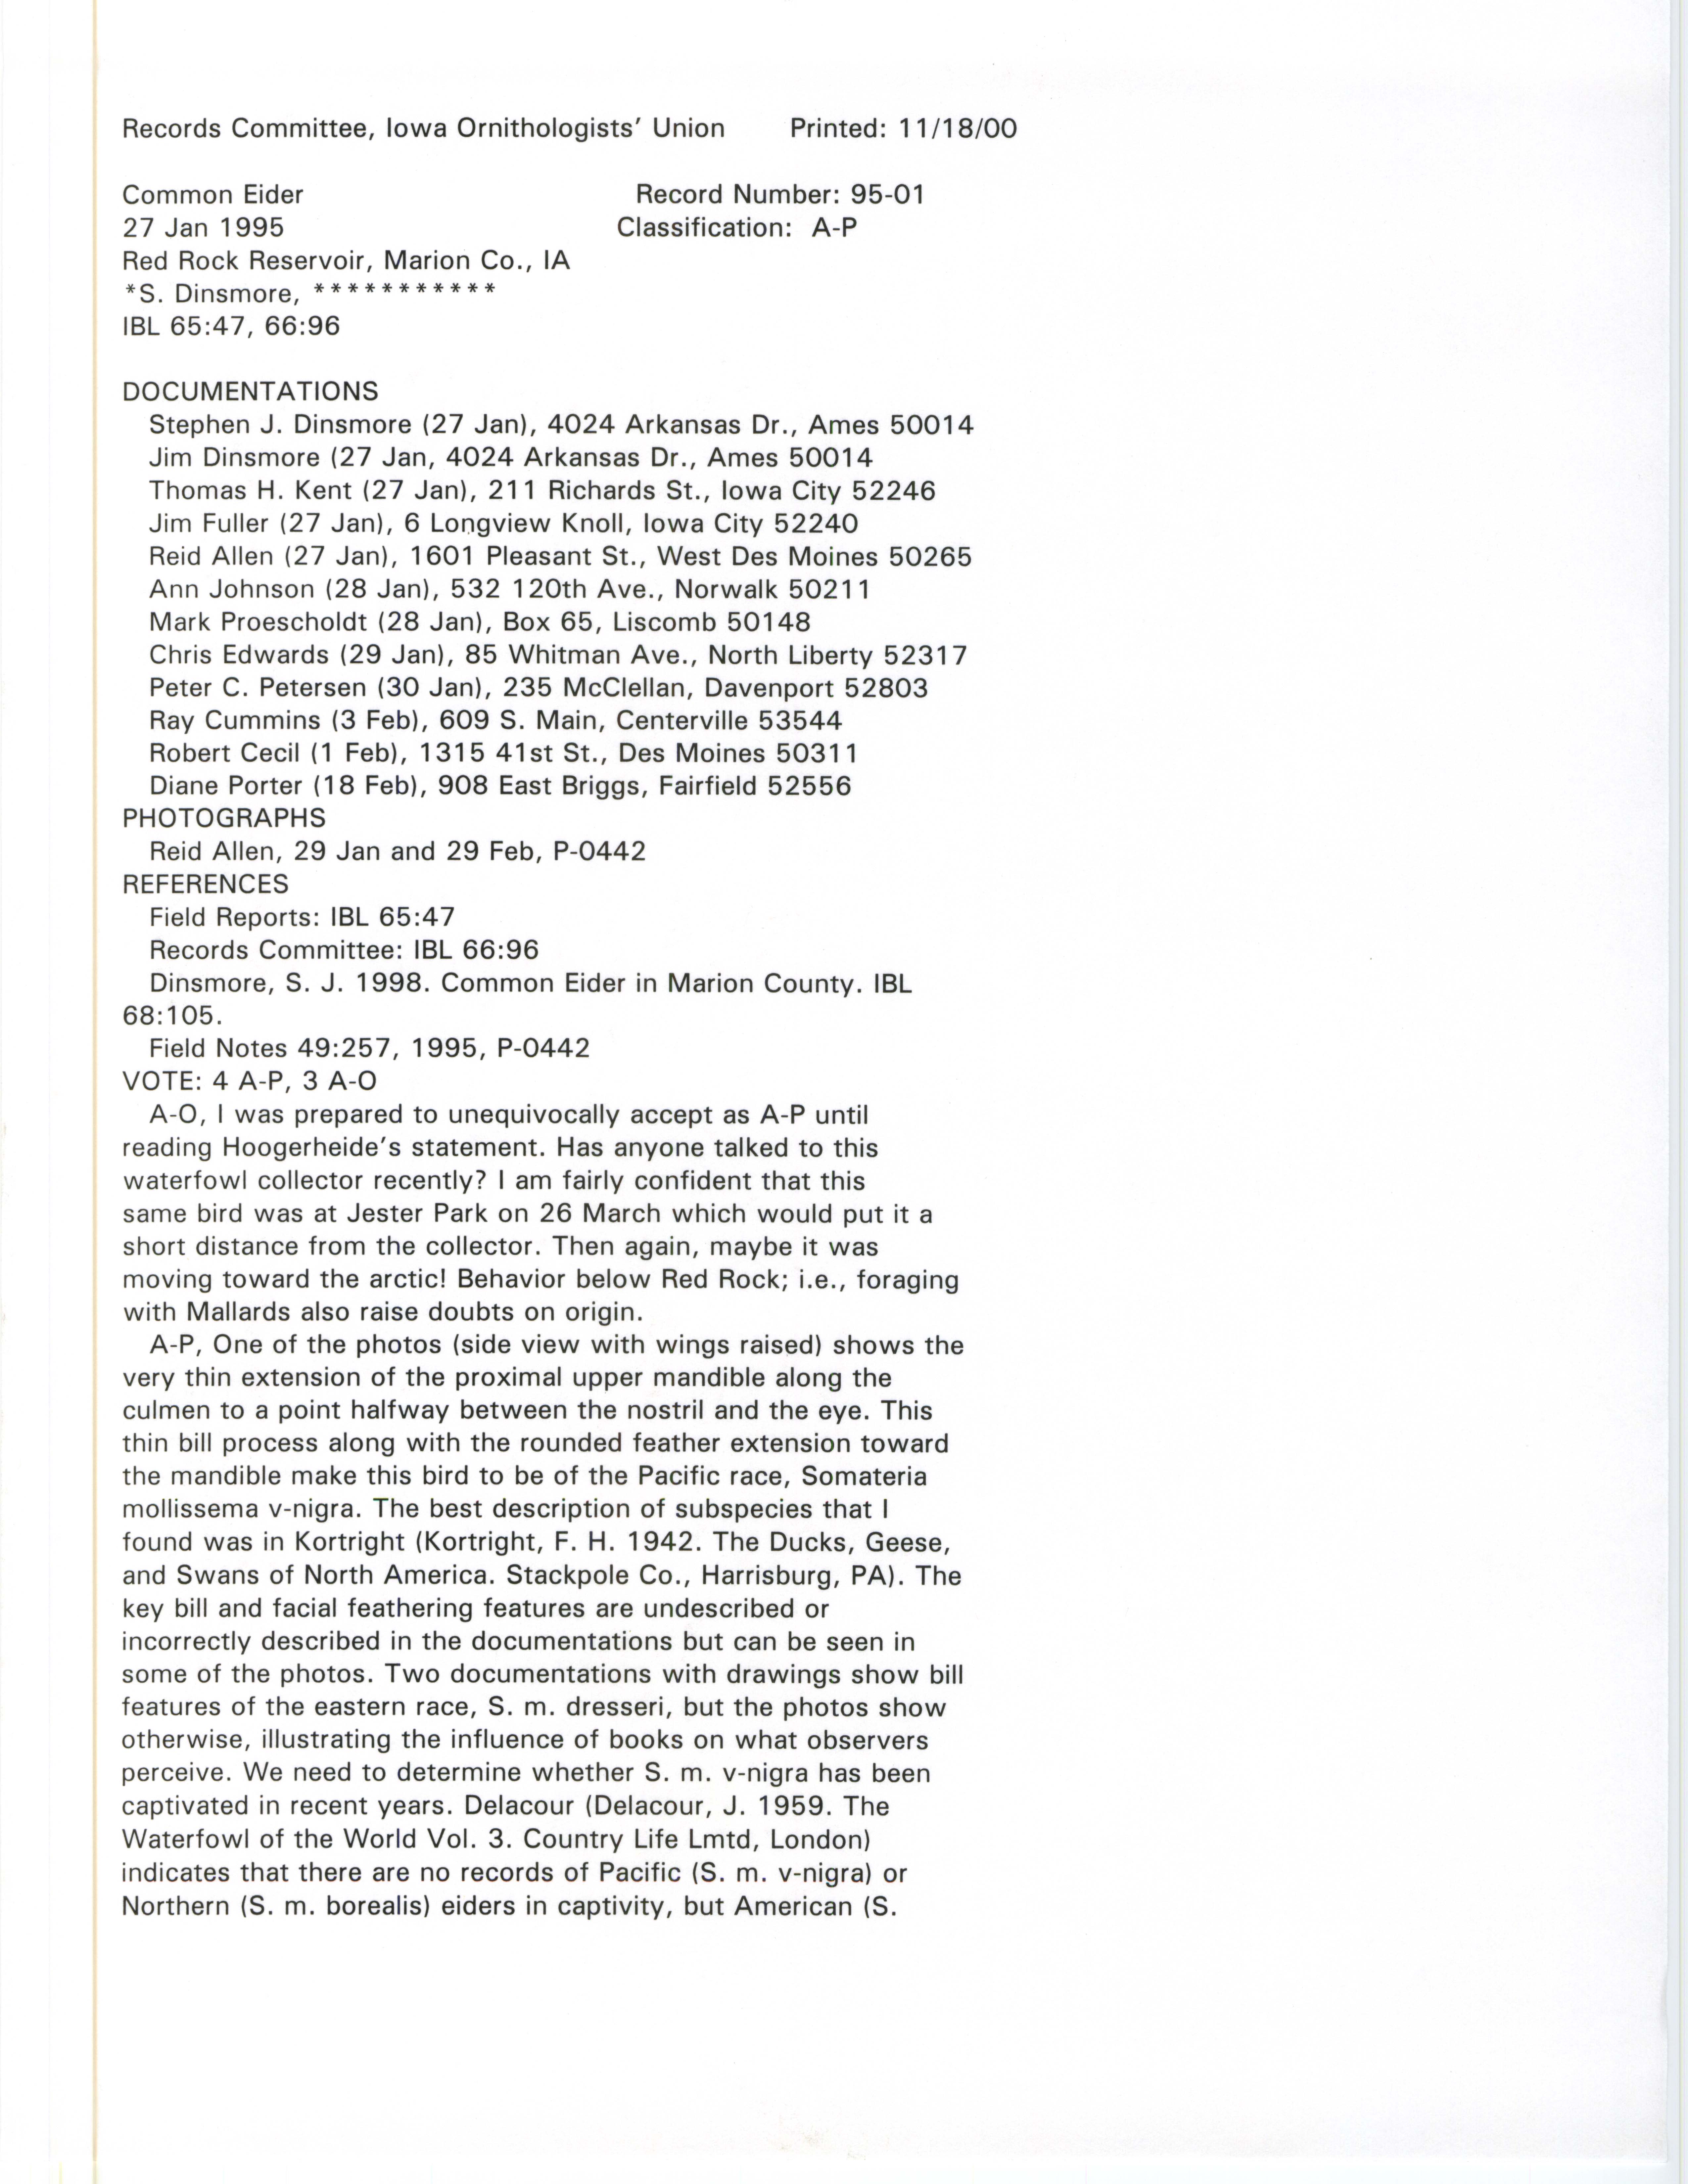 Records Committee review for rare bird sighting of Common Eider at Red Rock Reservoir, 1995